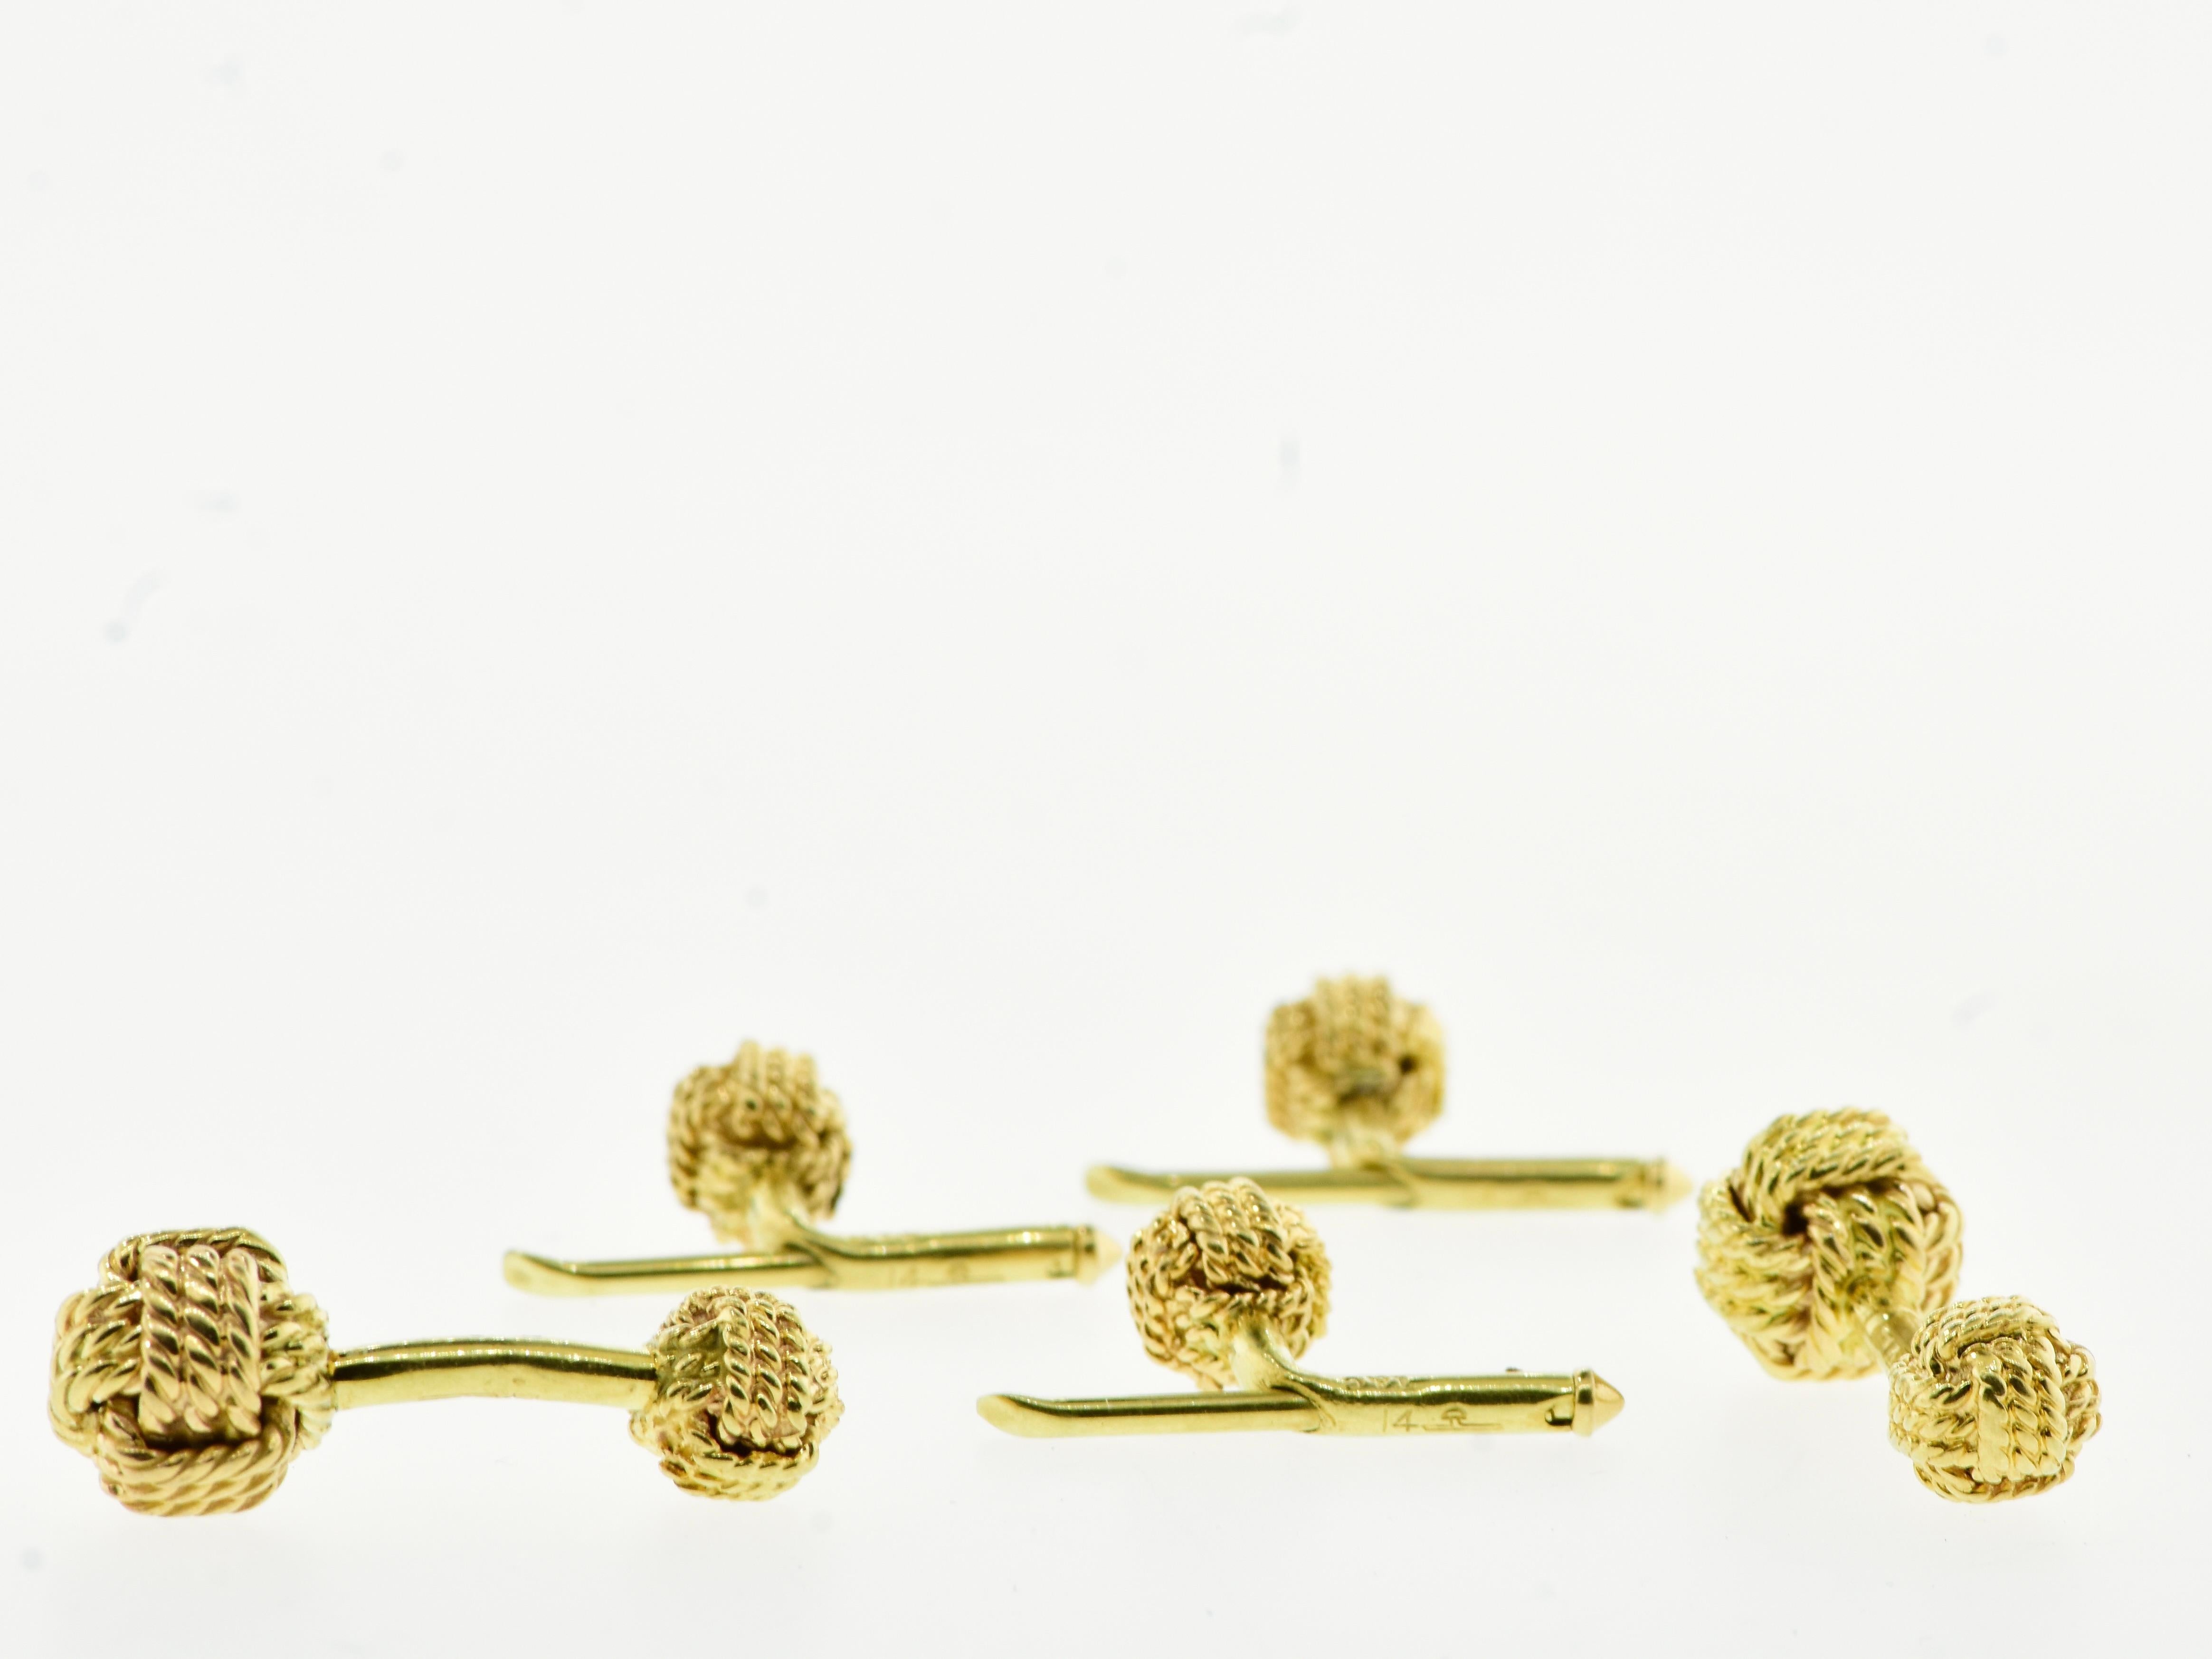 Tiffany & Co. Yellow Gold Cuff & Stud Set in a Love Knot Motif, Vintage, c. 1970 For Sale 3